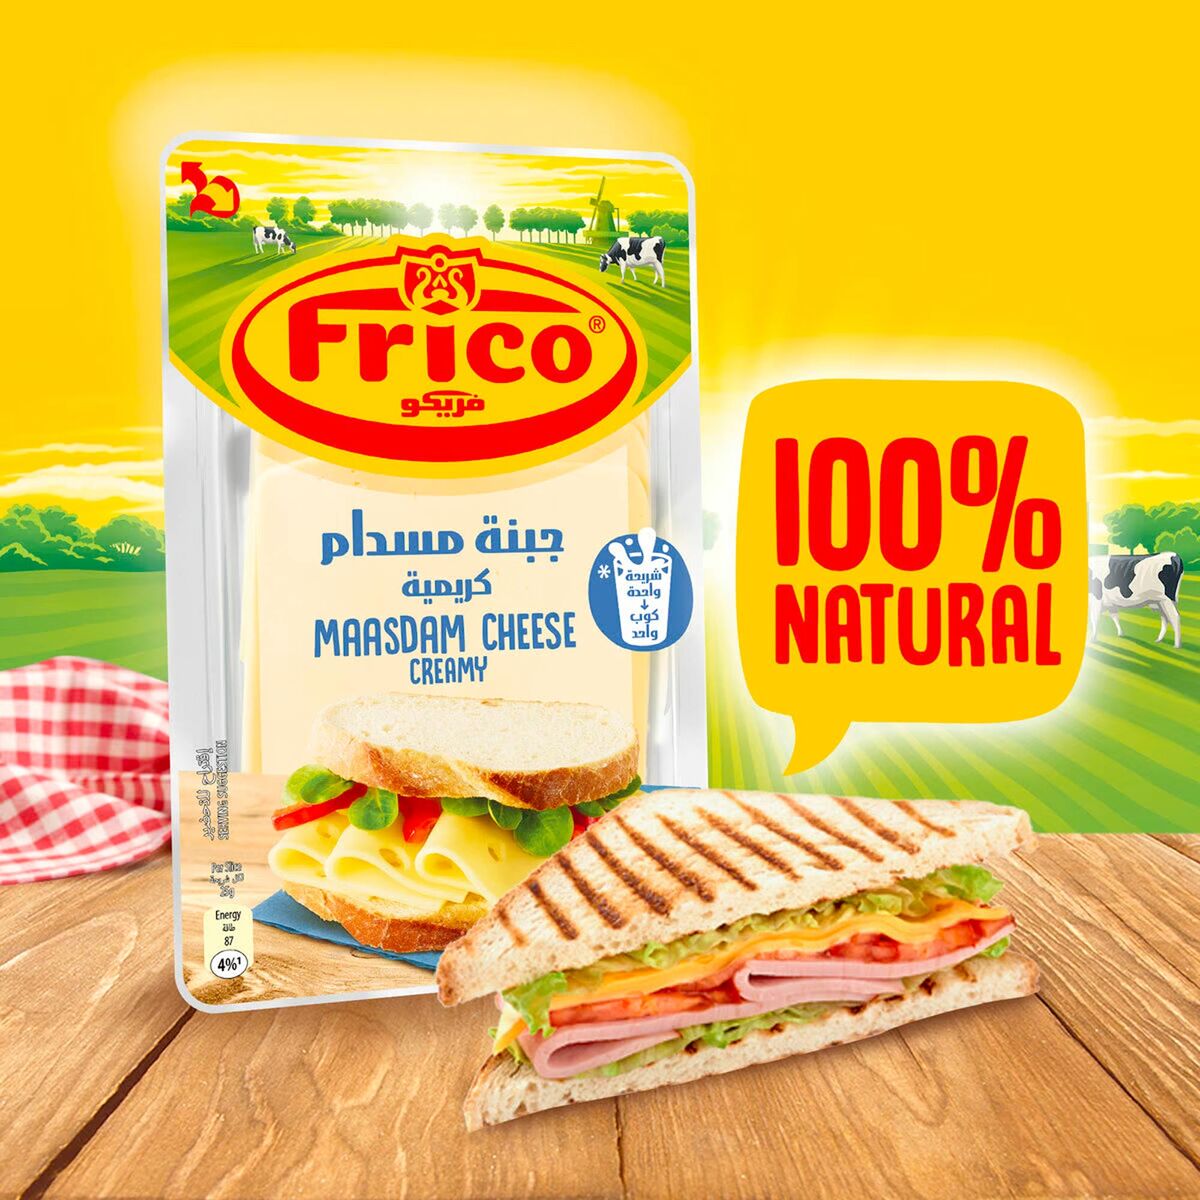 Frico Creamy Maasdam Cheese Slices Value Pack 2 x 150 g